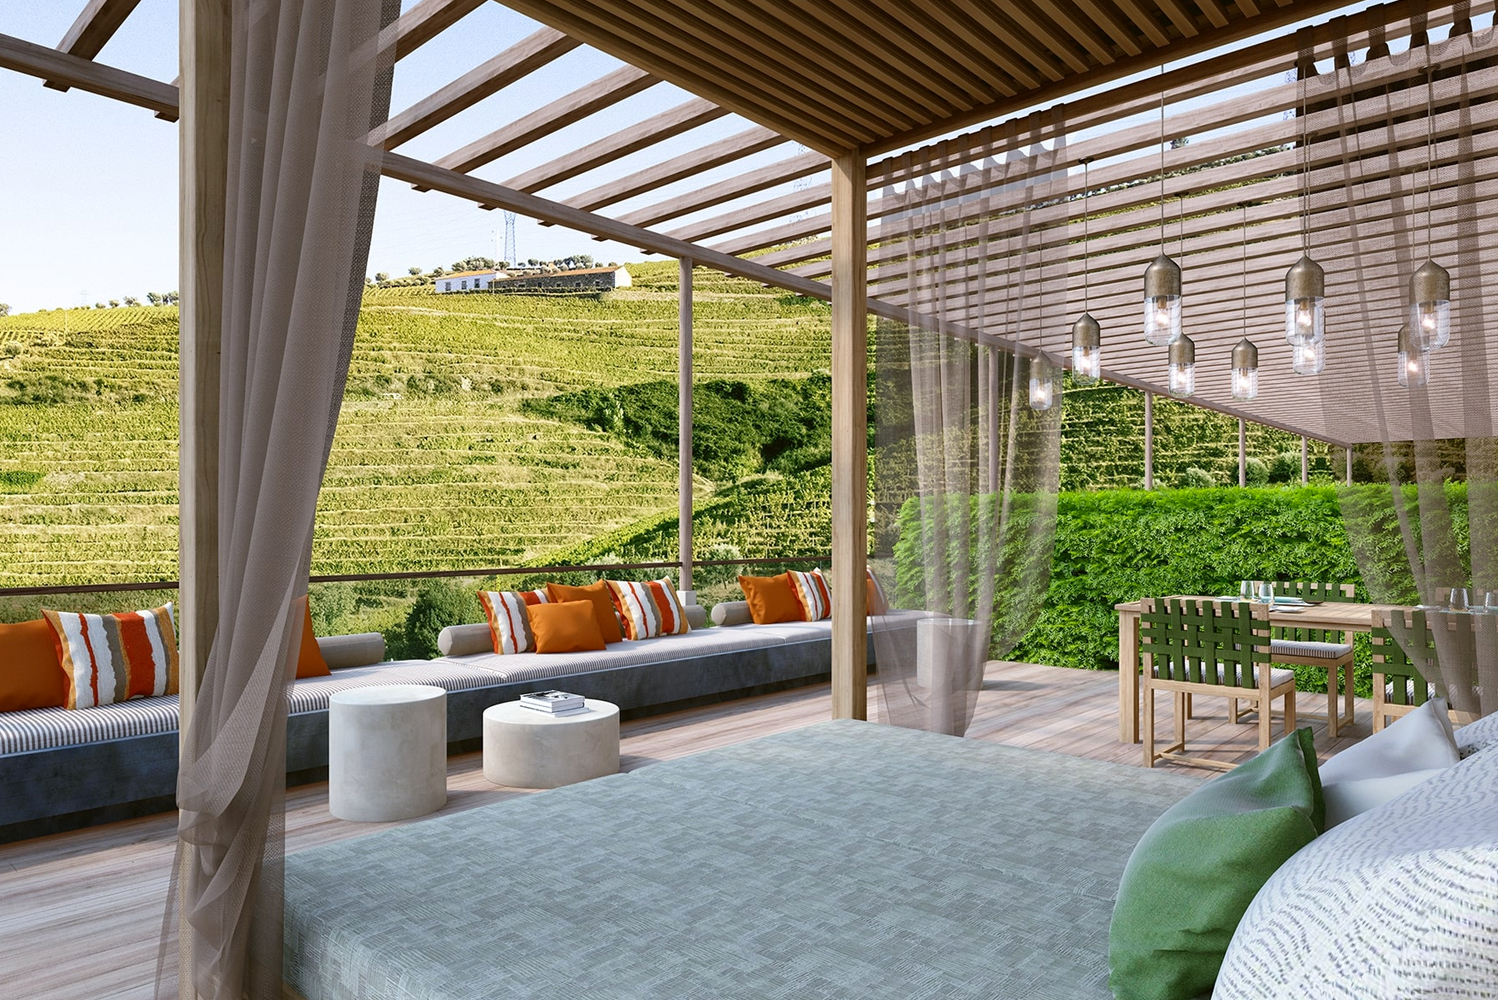 Work is in progress to add seven suites and three guestrooms at Six Senses Douro Valley set to debut this summer 